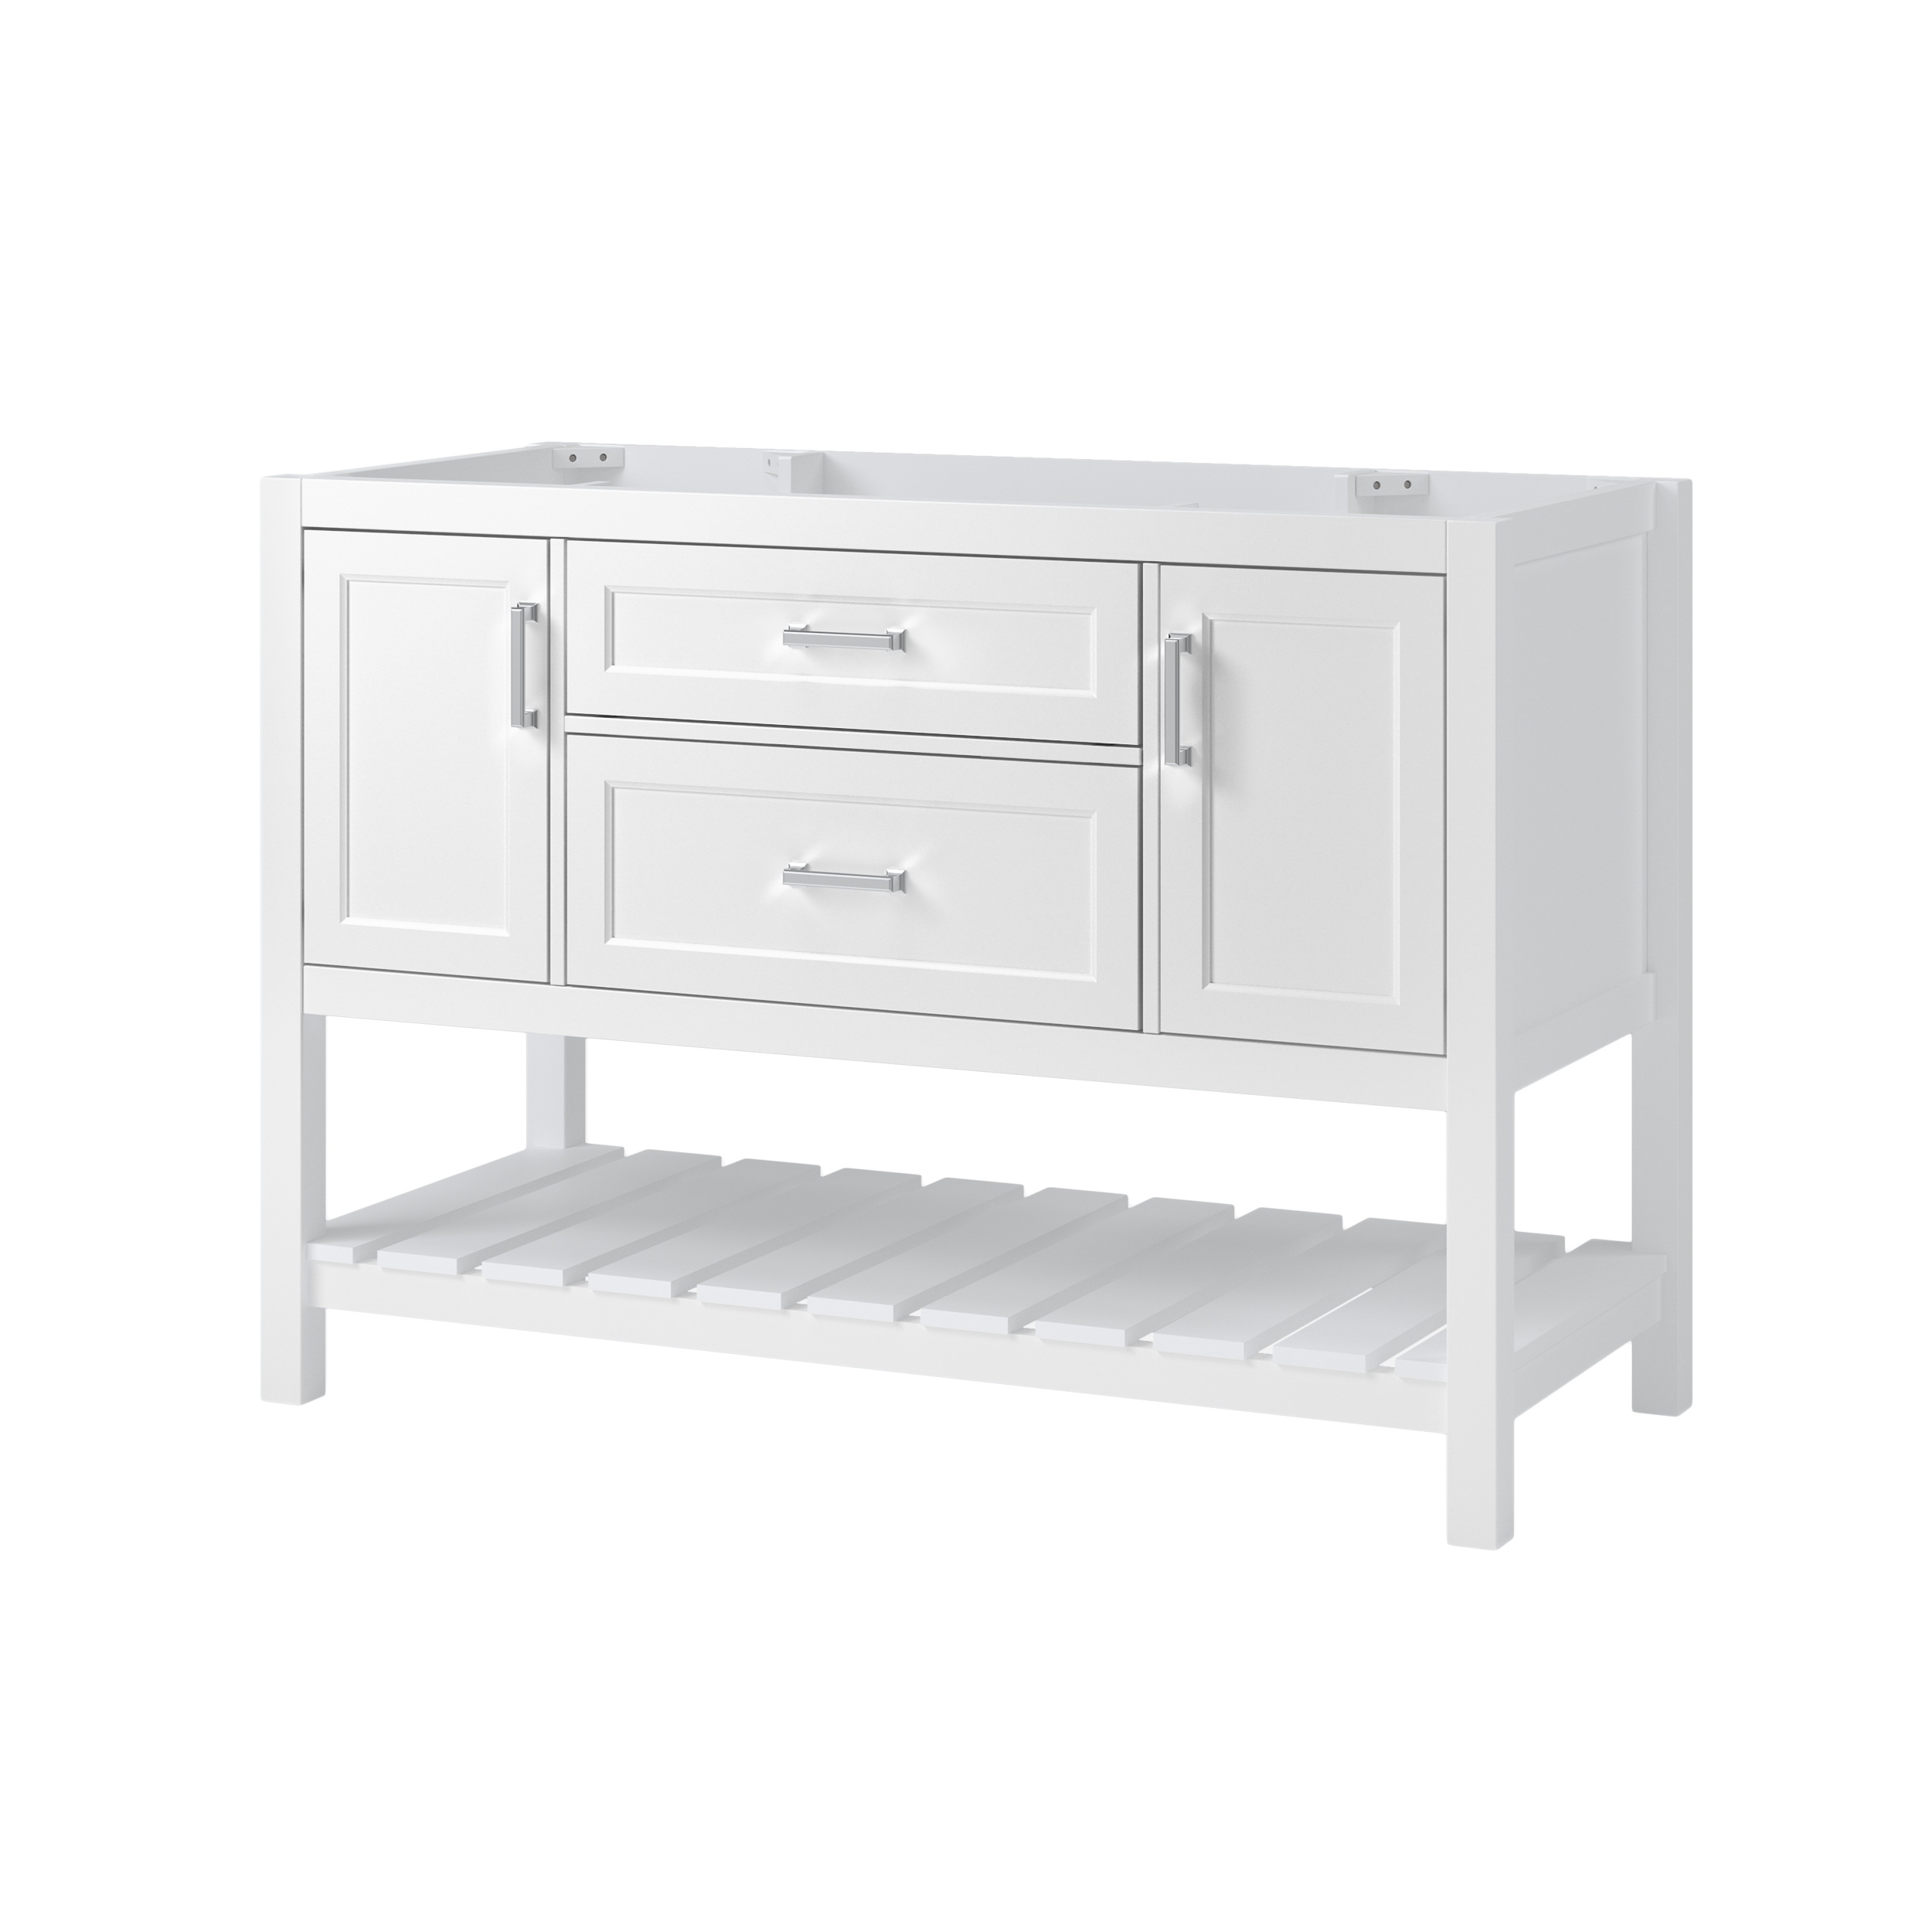 Lawson Series LSWV4822D Vanity Cabinet, 48 in W Cabinet, 21-1/2 in D Cabinet, 34 in H Cabinet, Wood, White